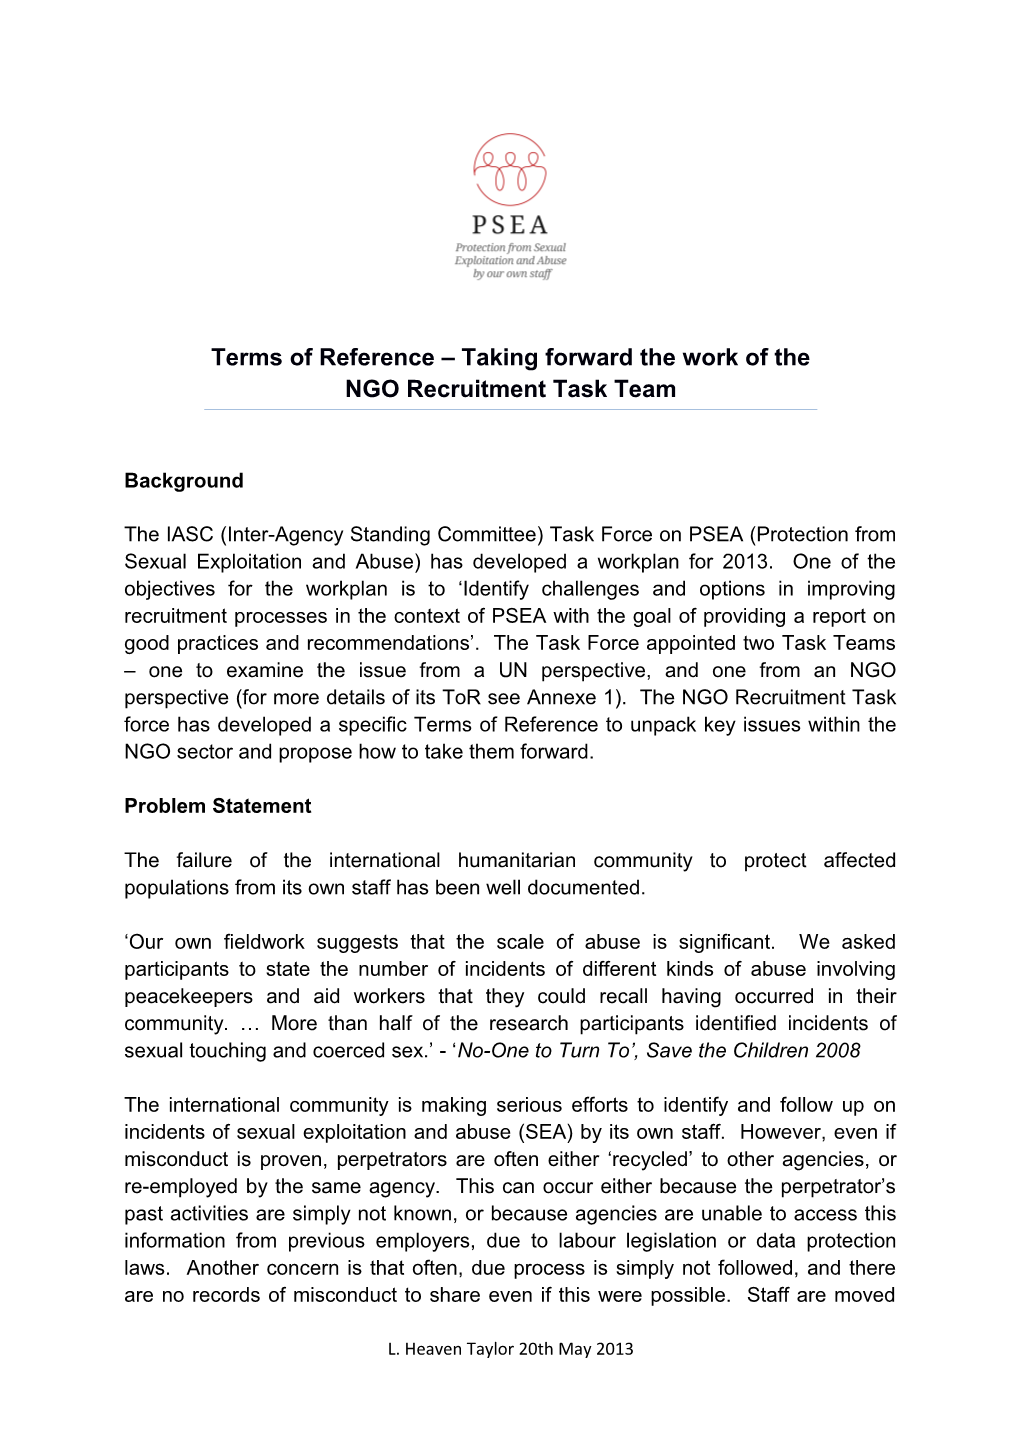 Terms of Reference Taking Forward the Work of the NGO Recruitment Task Team